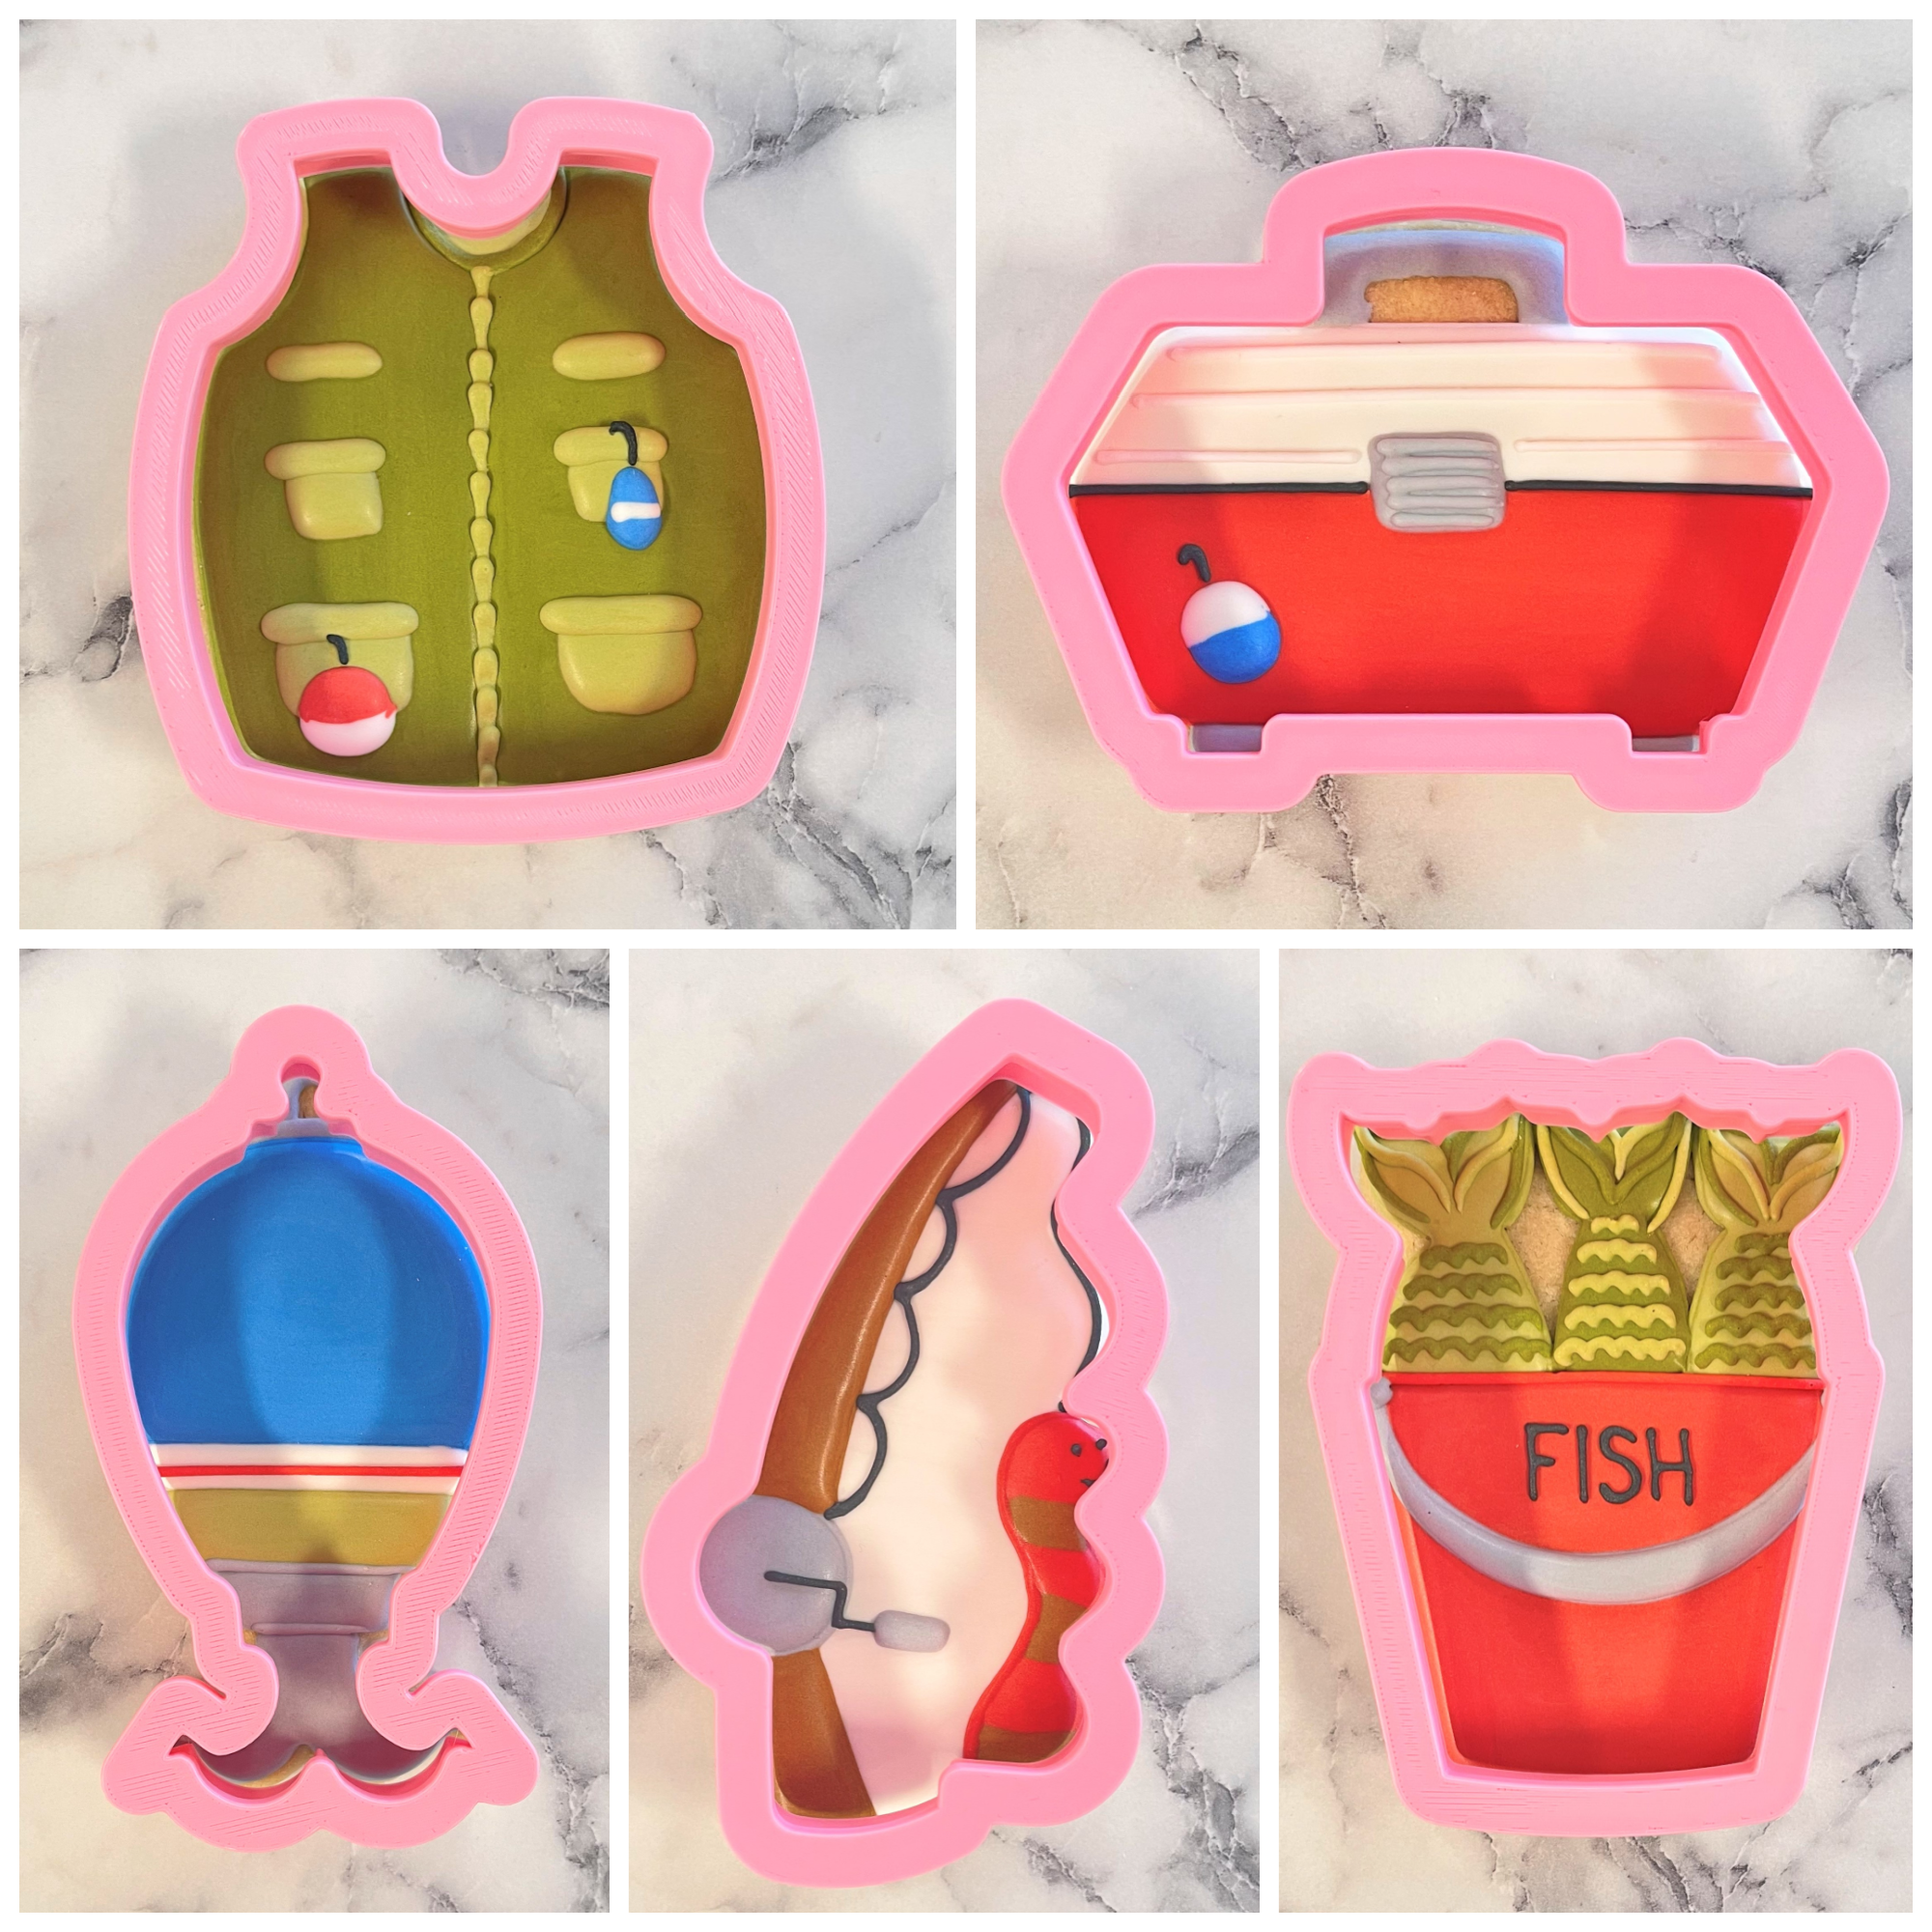 Fishing Cookie Cutter Set – The Flour Box